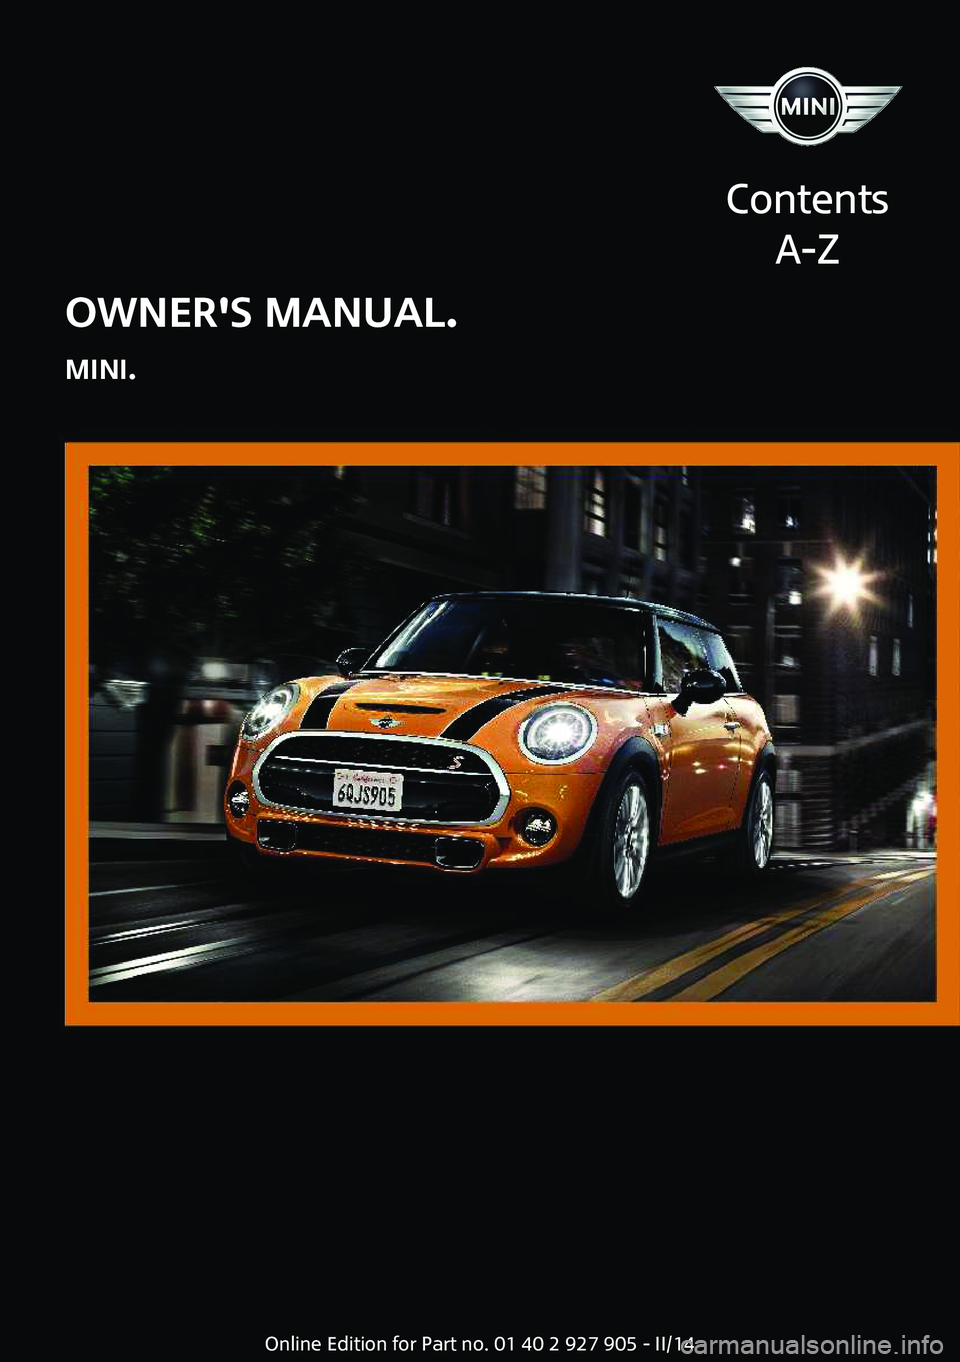 MINI COOPER 2014  Owners Manual OWNER'S MANUAL.
MINI.
Contents A-ZOnline Edition for Part no. 01 40 2 927 905 - II/14  